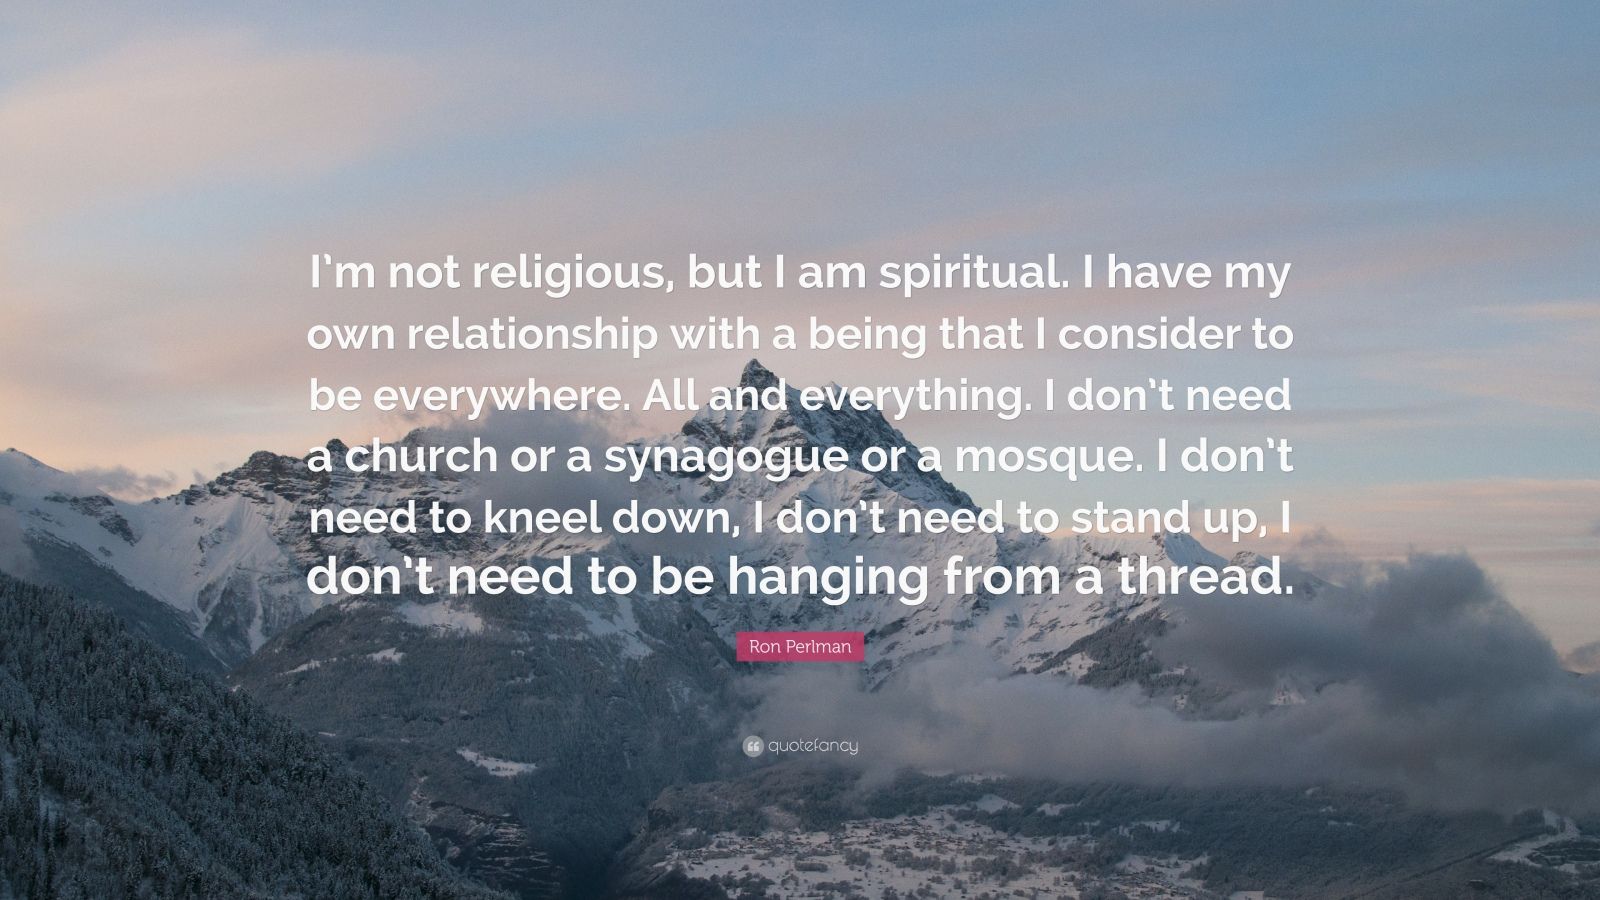 Ron Perlman Quote “I’m not religious, but I am spiritual